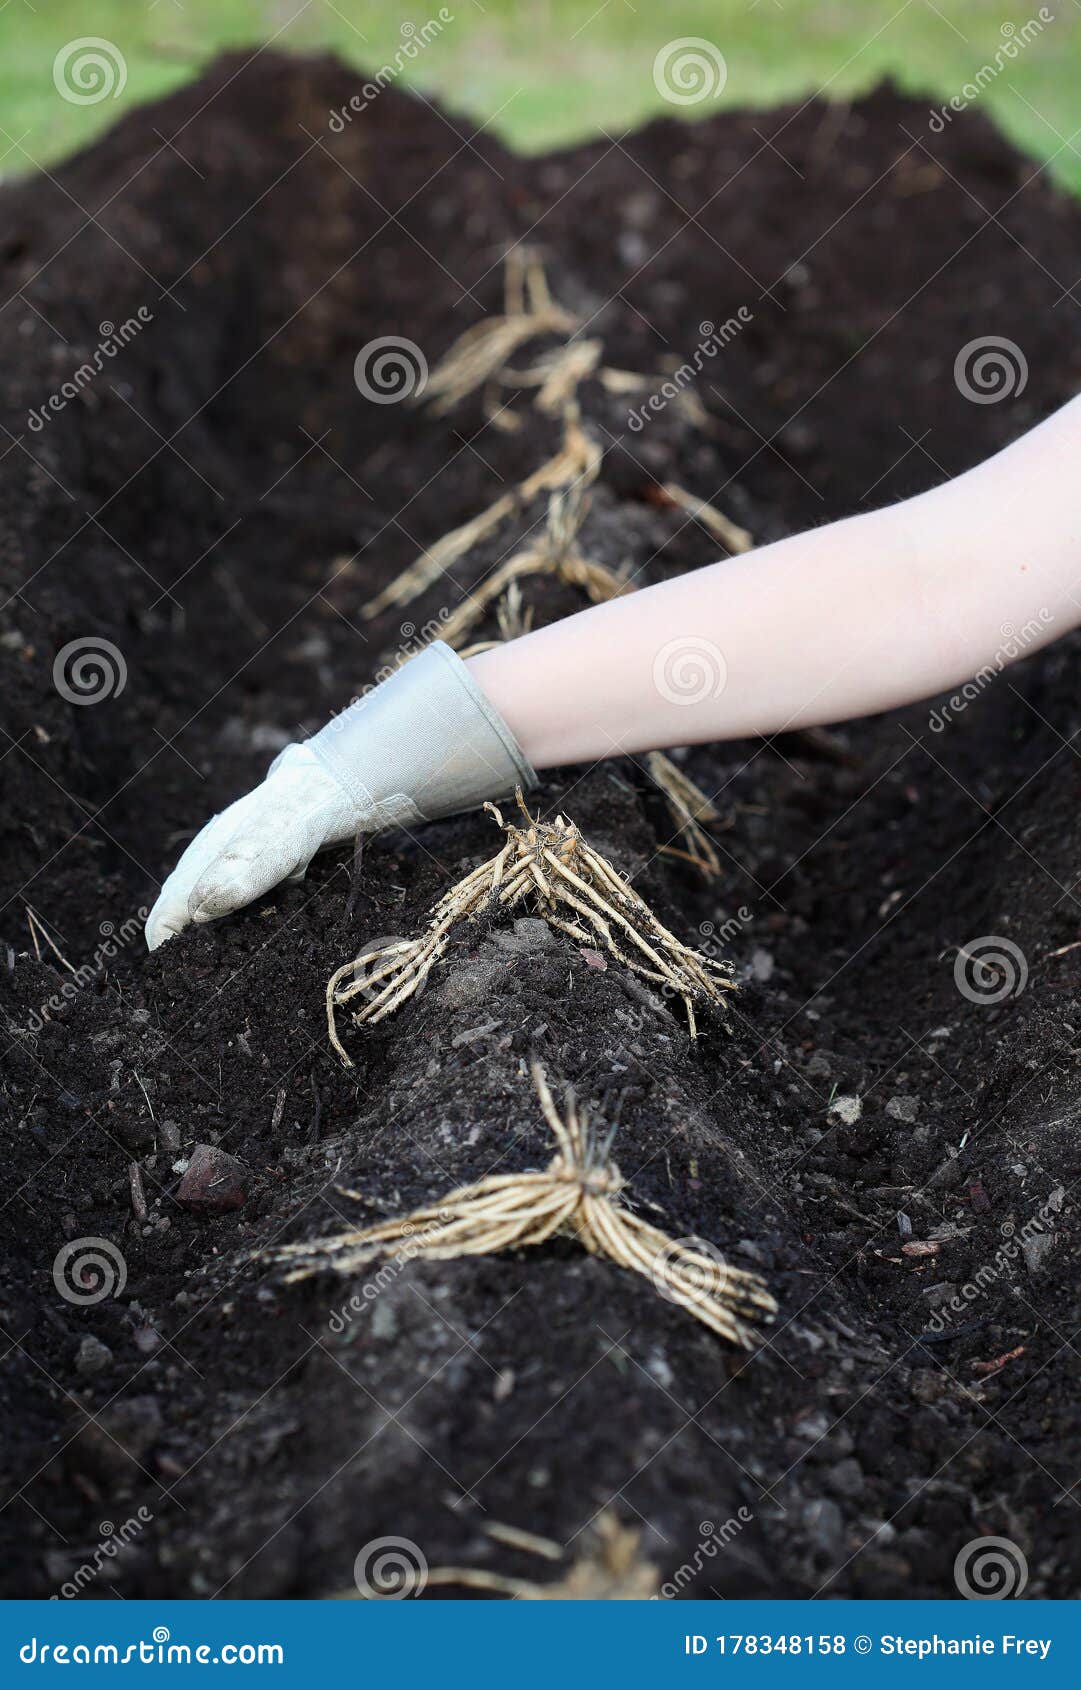 asparagus rhizomes being planted in compost and humus